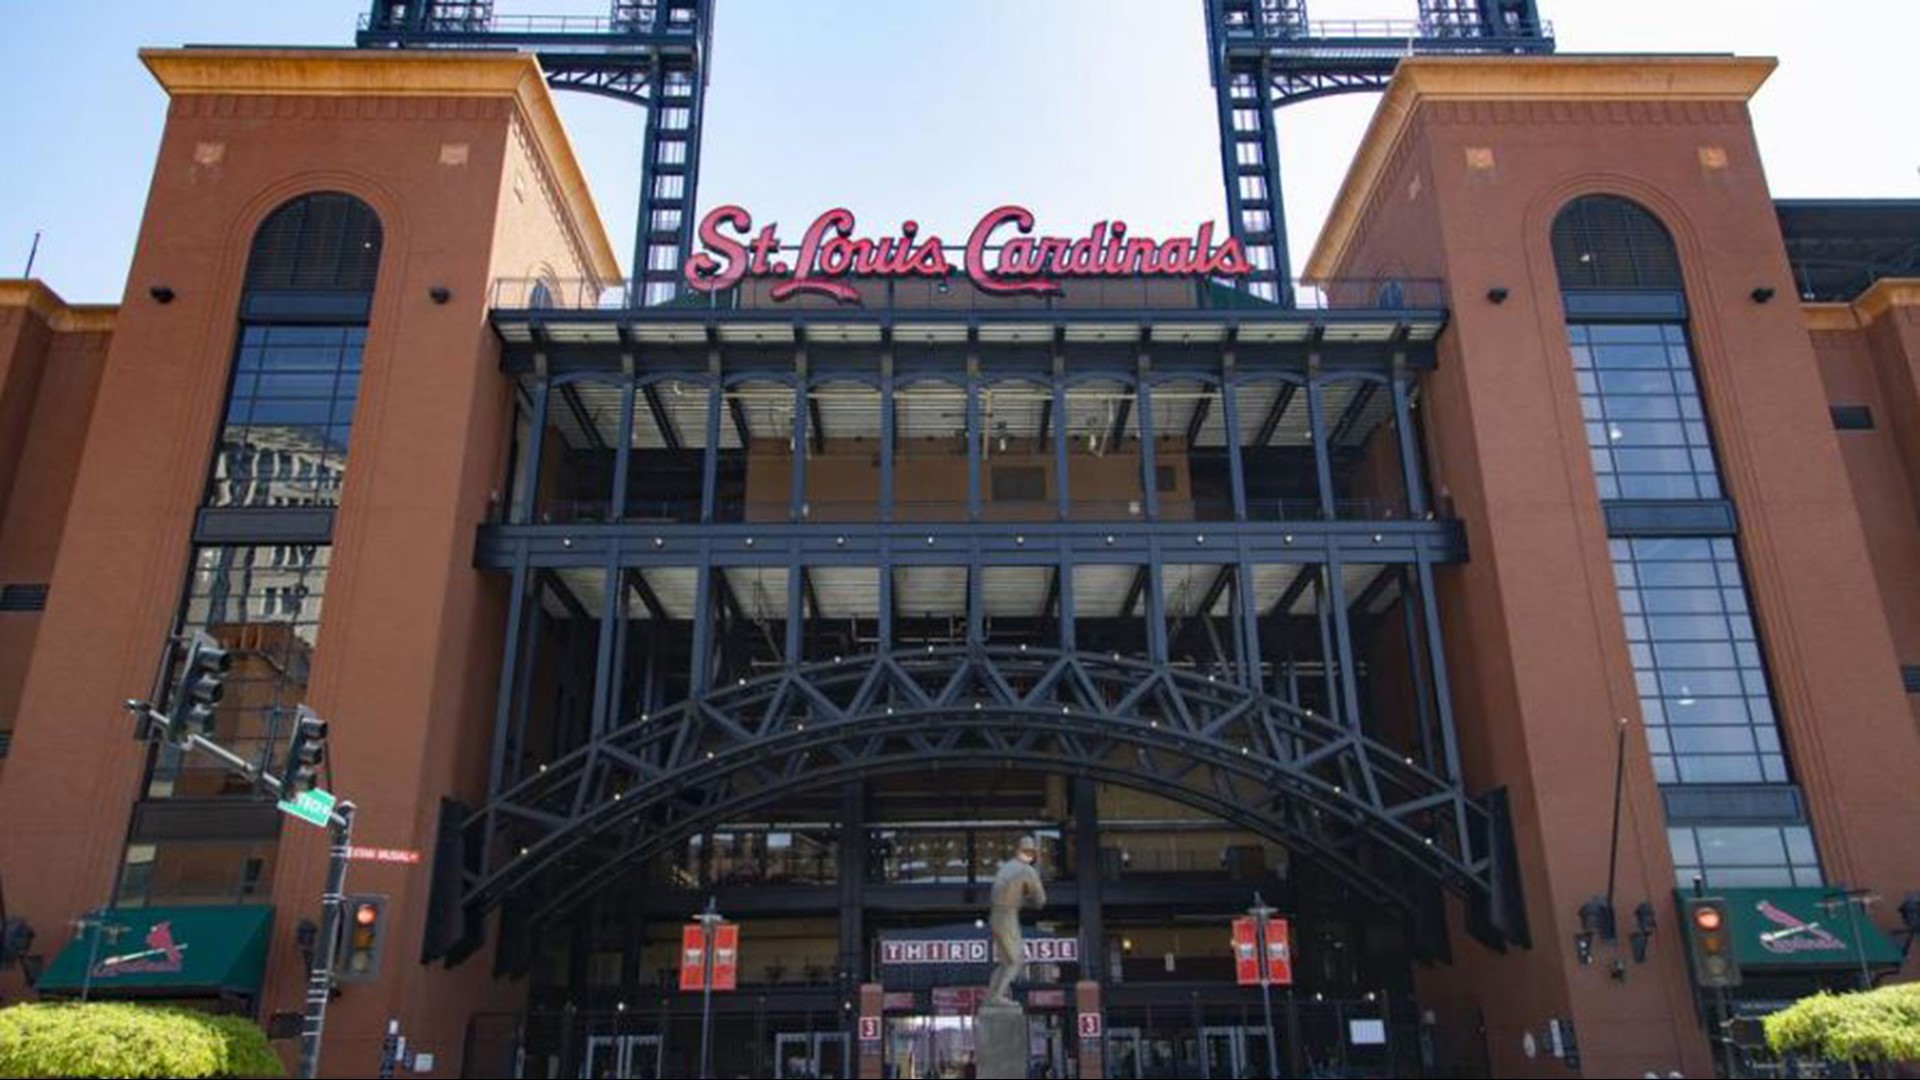 About 45,000 fans are allowed inside Busch Stadium since Saturday, Oct. 12, 2019.